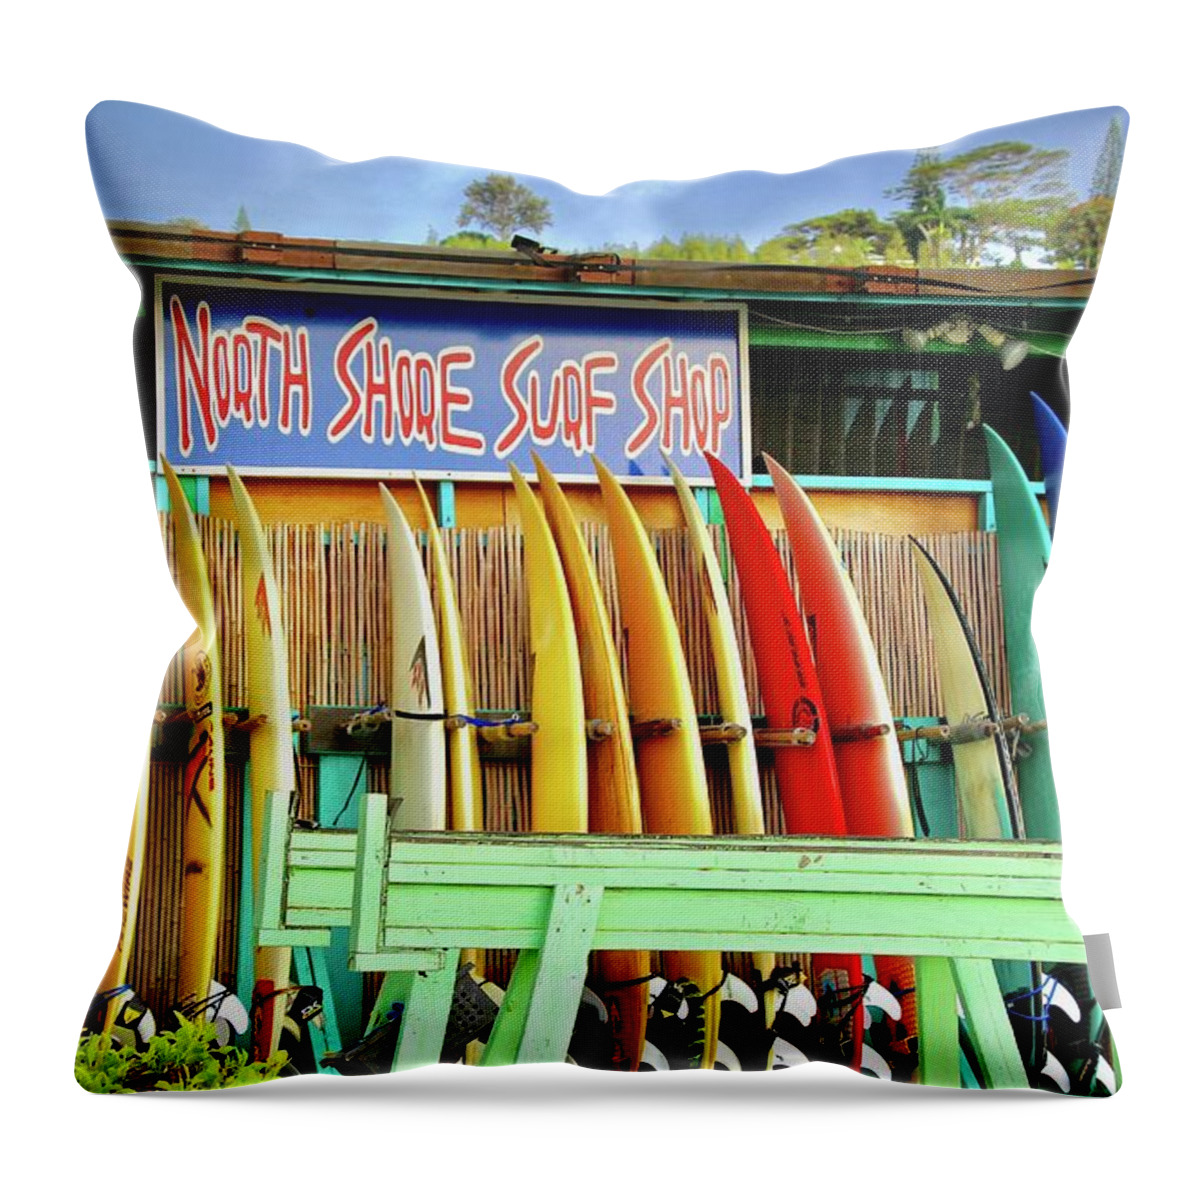 North Shore Throw Pillow featuring the photograph North Shore Surf Shop 1 by Jim Albritton